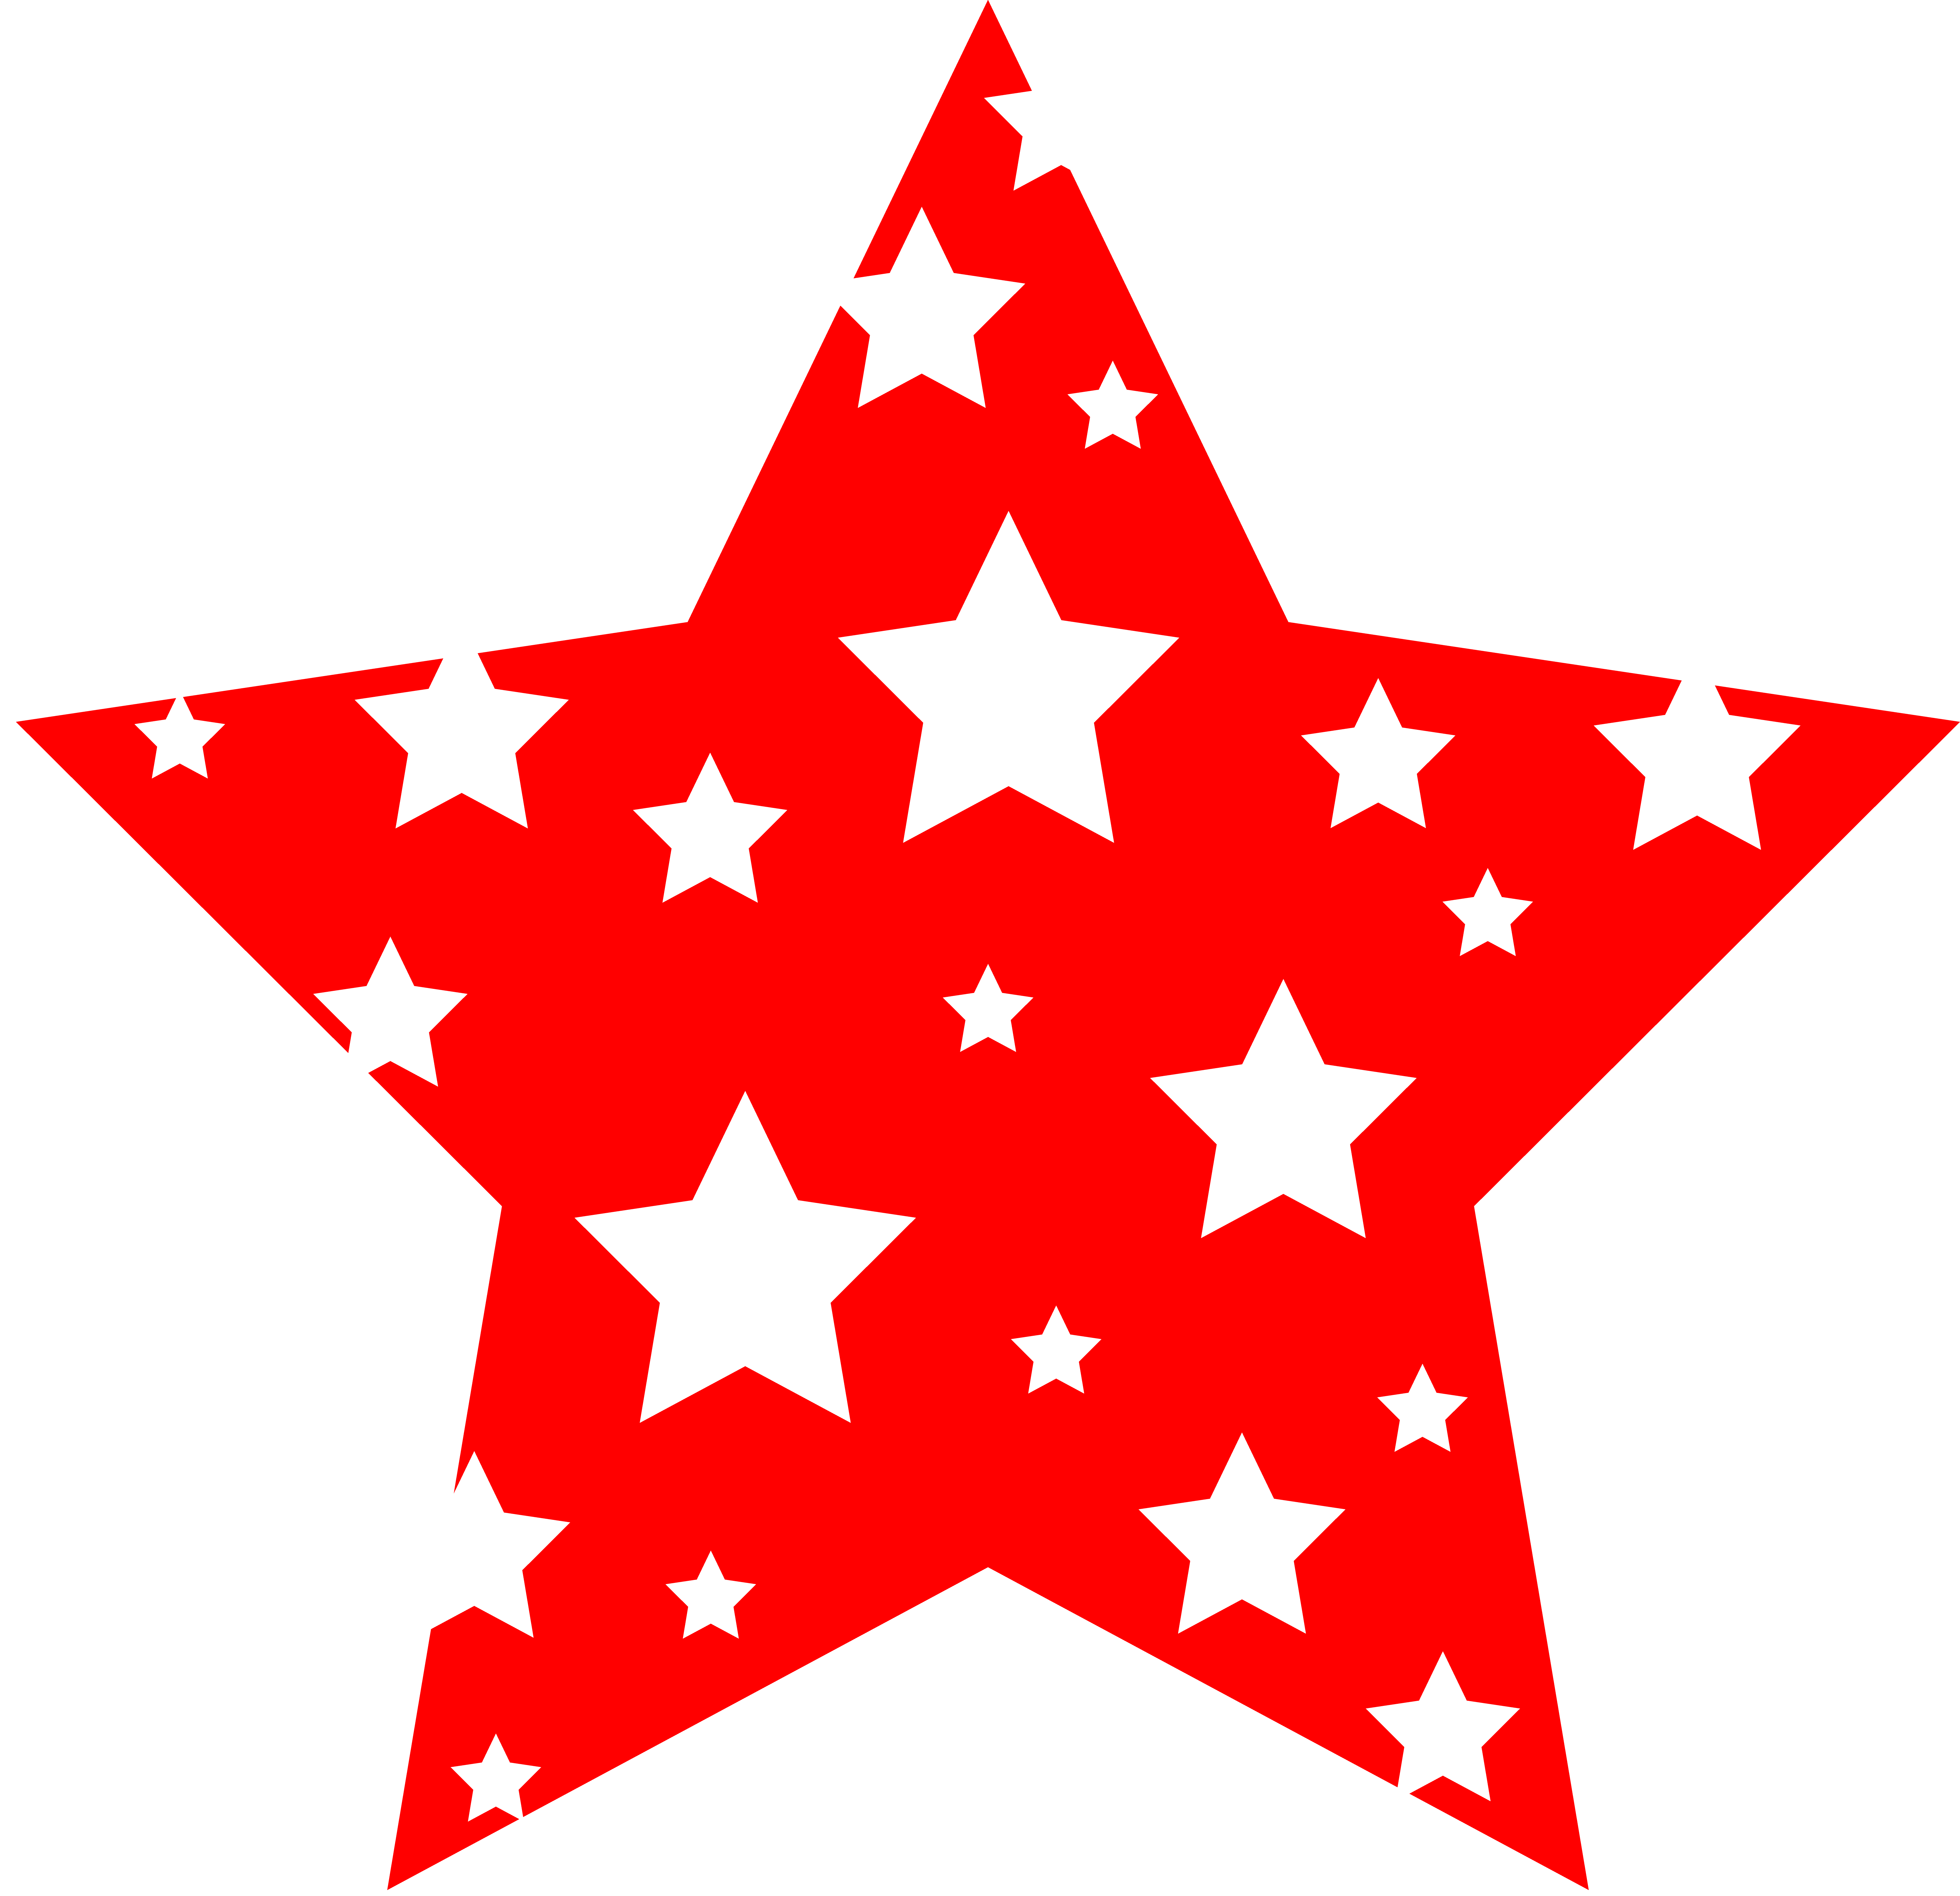 Star Picture - Cliparts.co